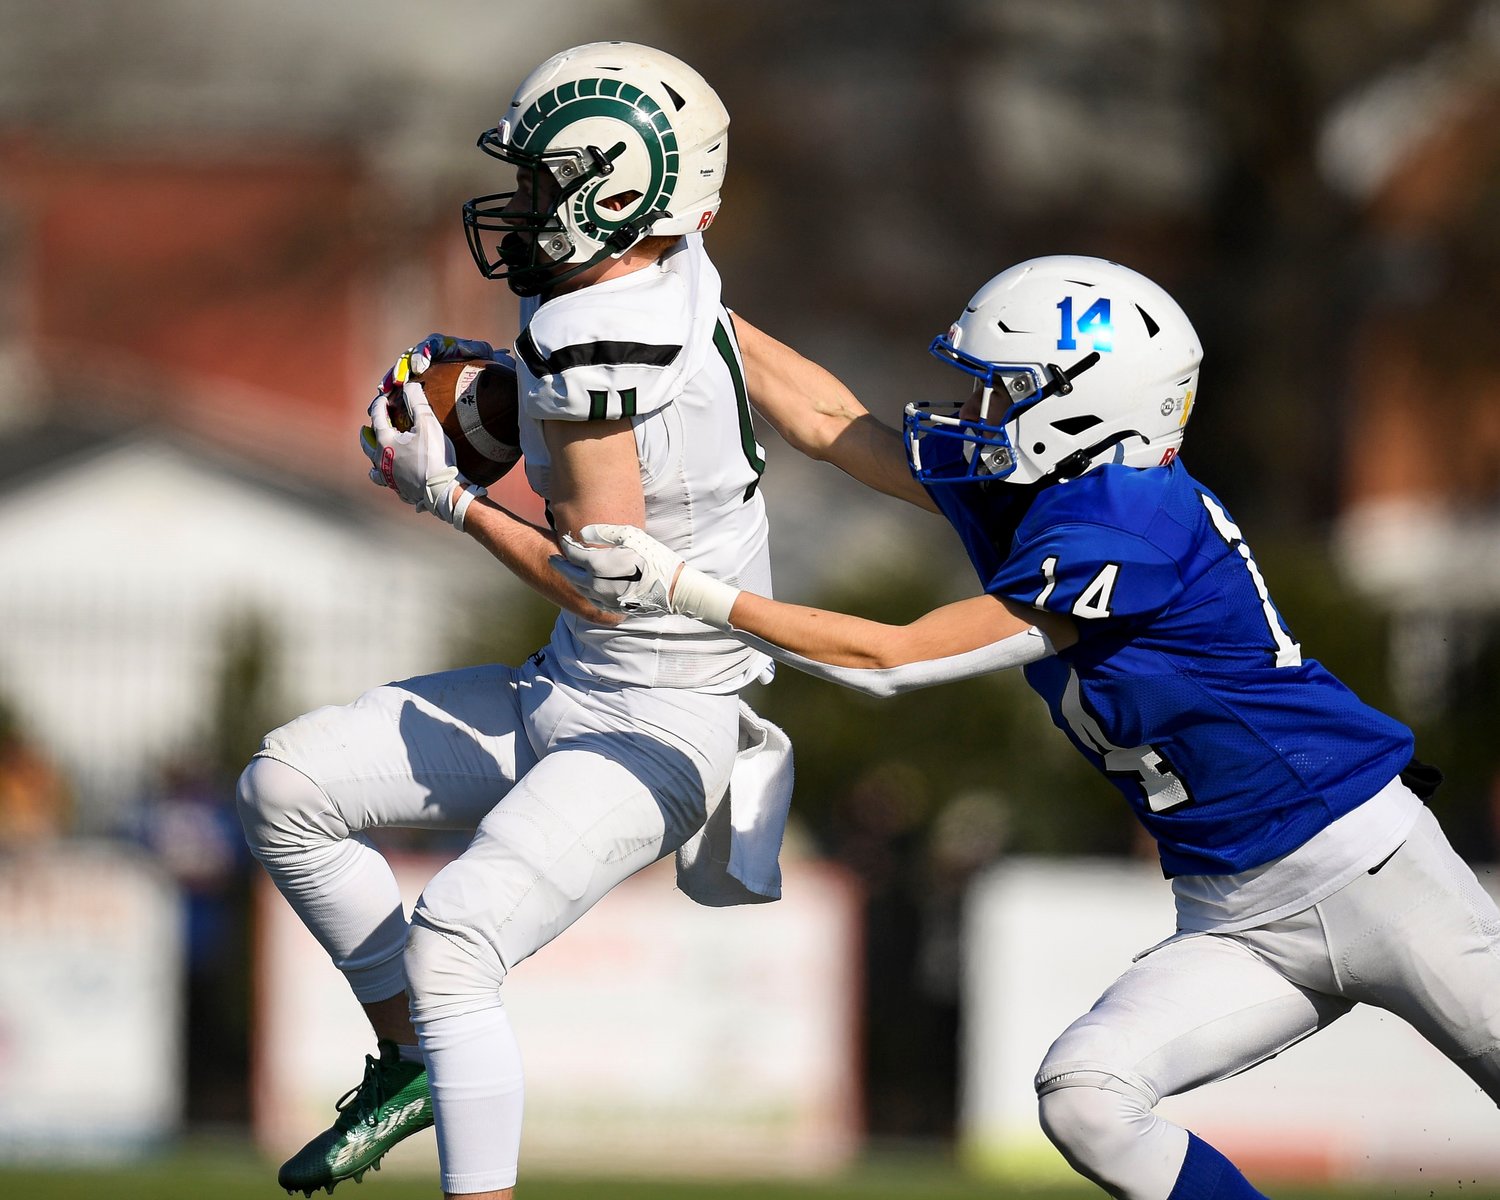 Pennridge receiver Nick Swanson steps in front of Quakertown’s Reagan Payne for one of quarterback Noah Keating’s 14 completions.